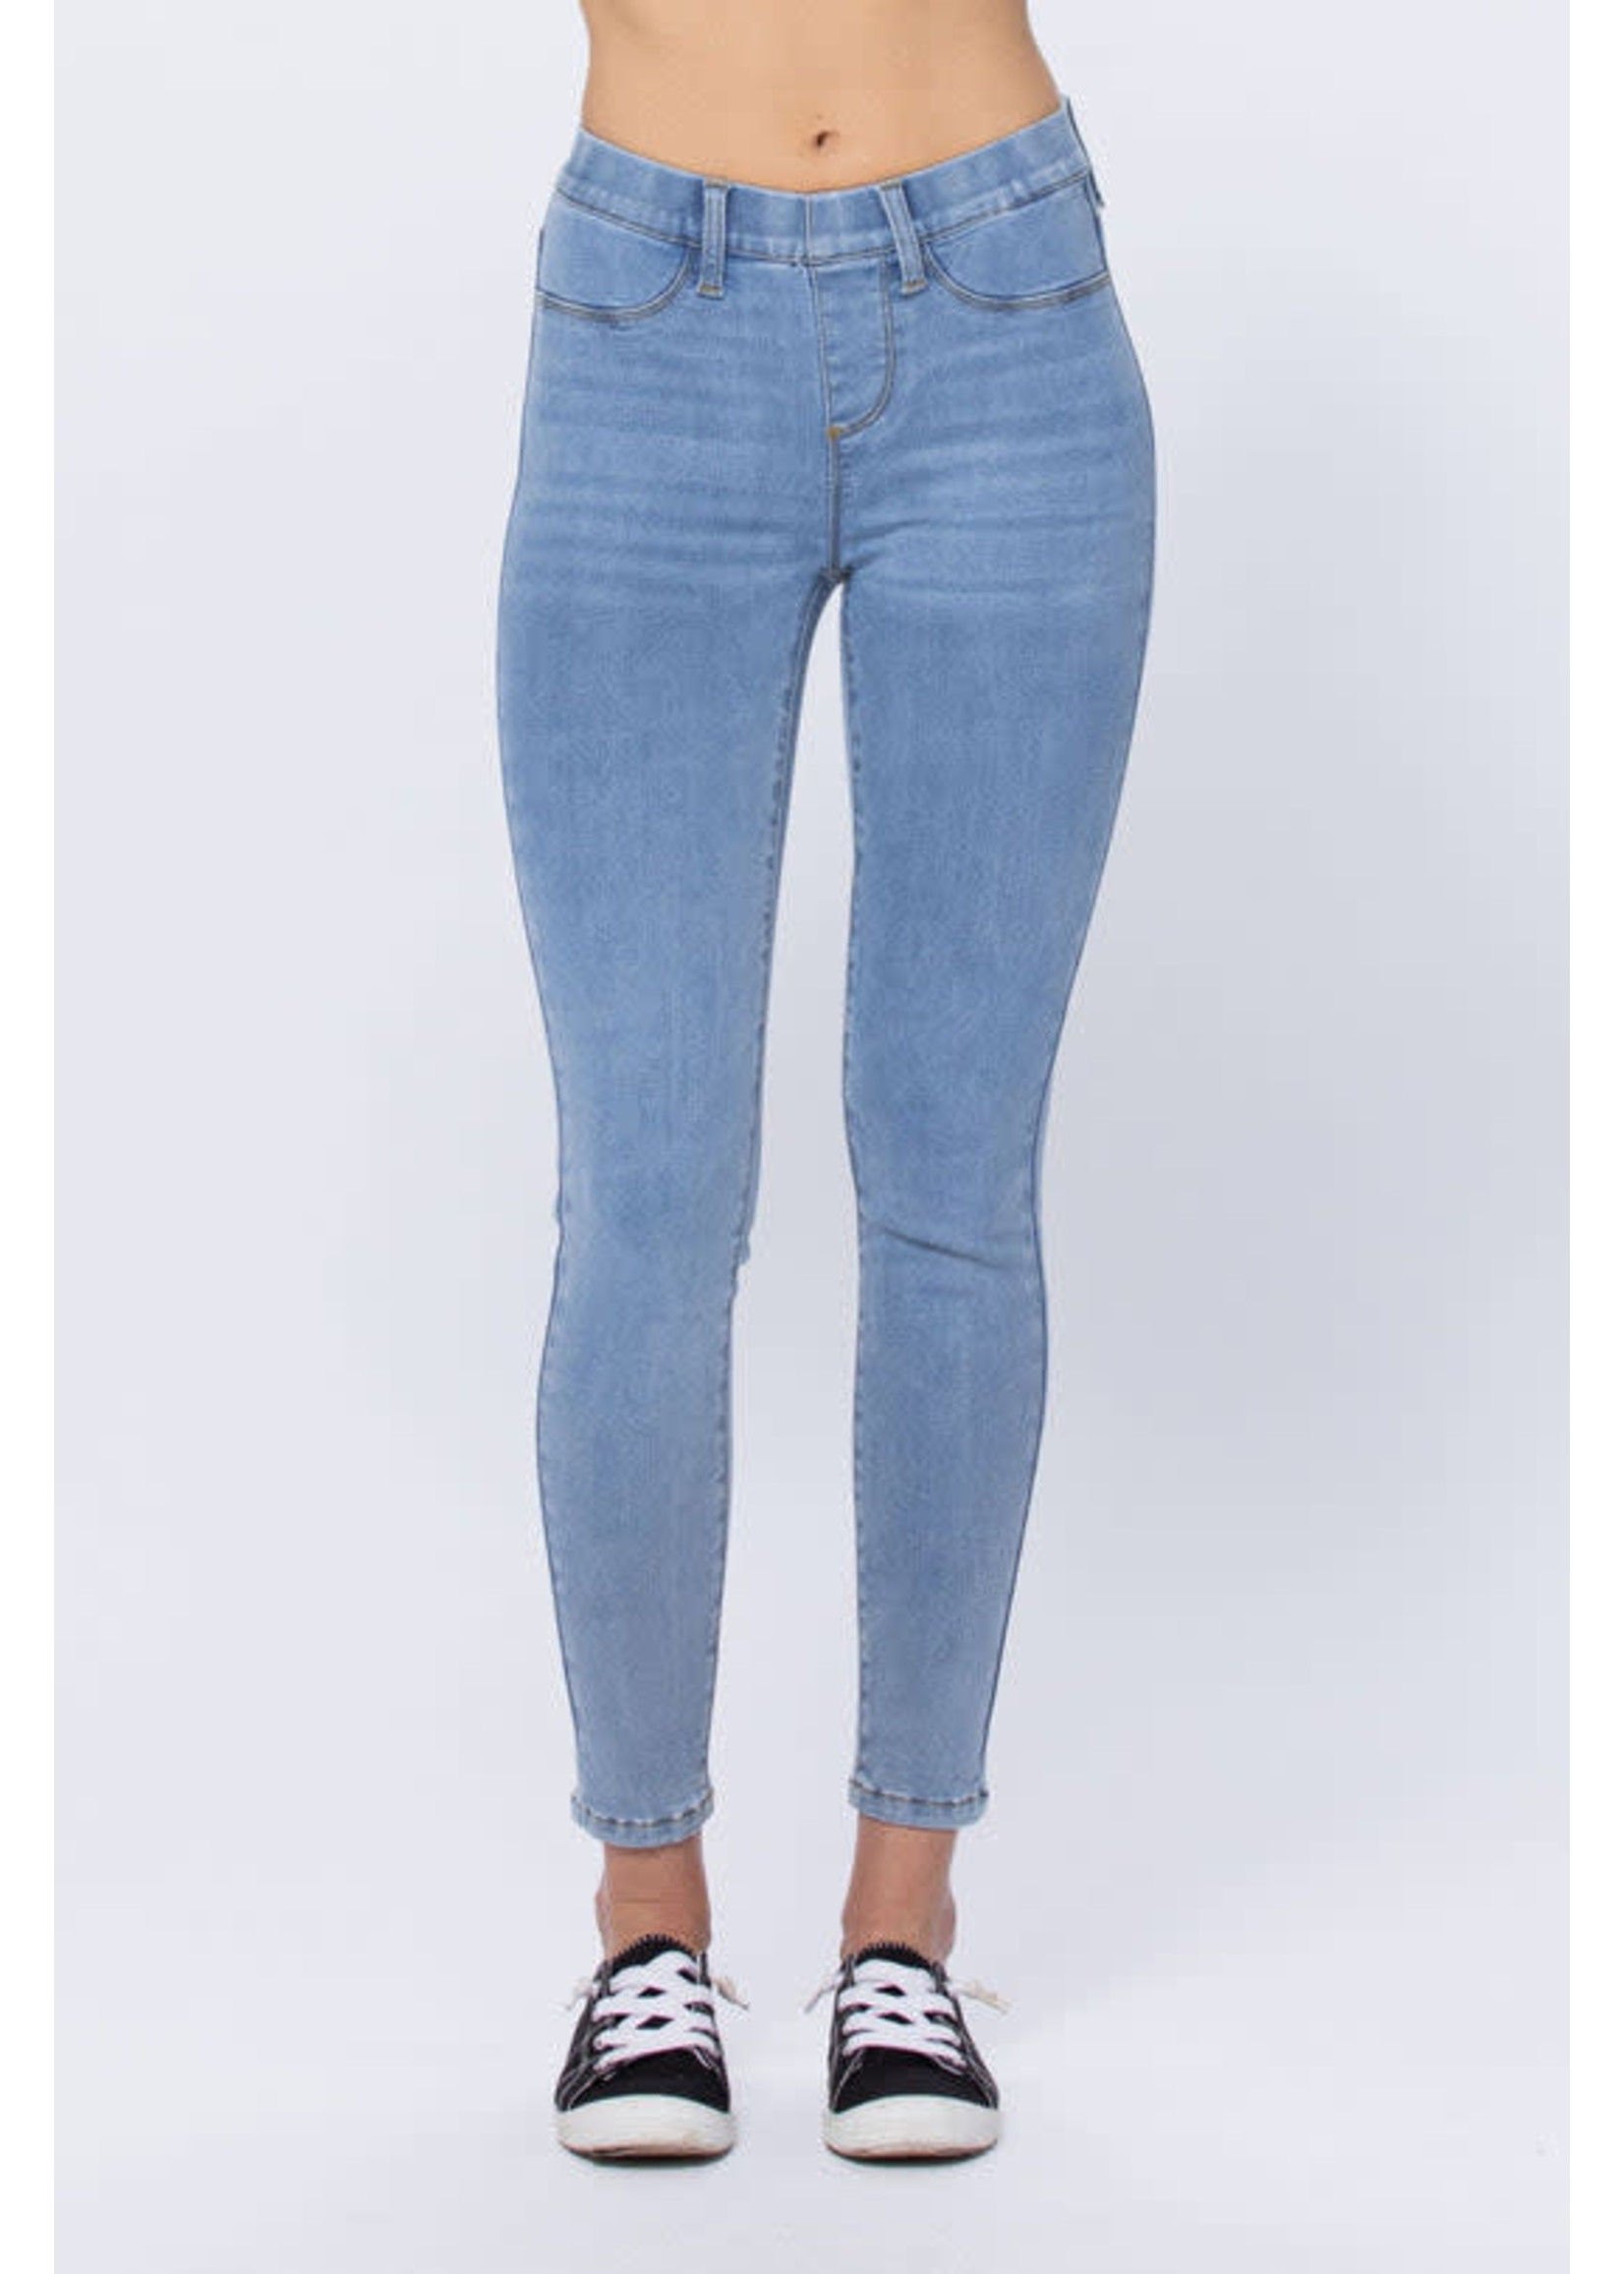 Judy Blue Mid-Rise Pull-on Skinny Jegging